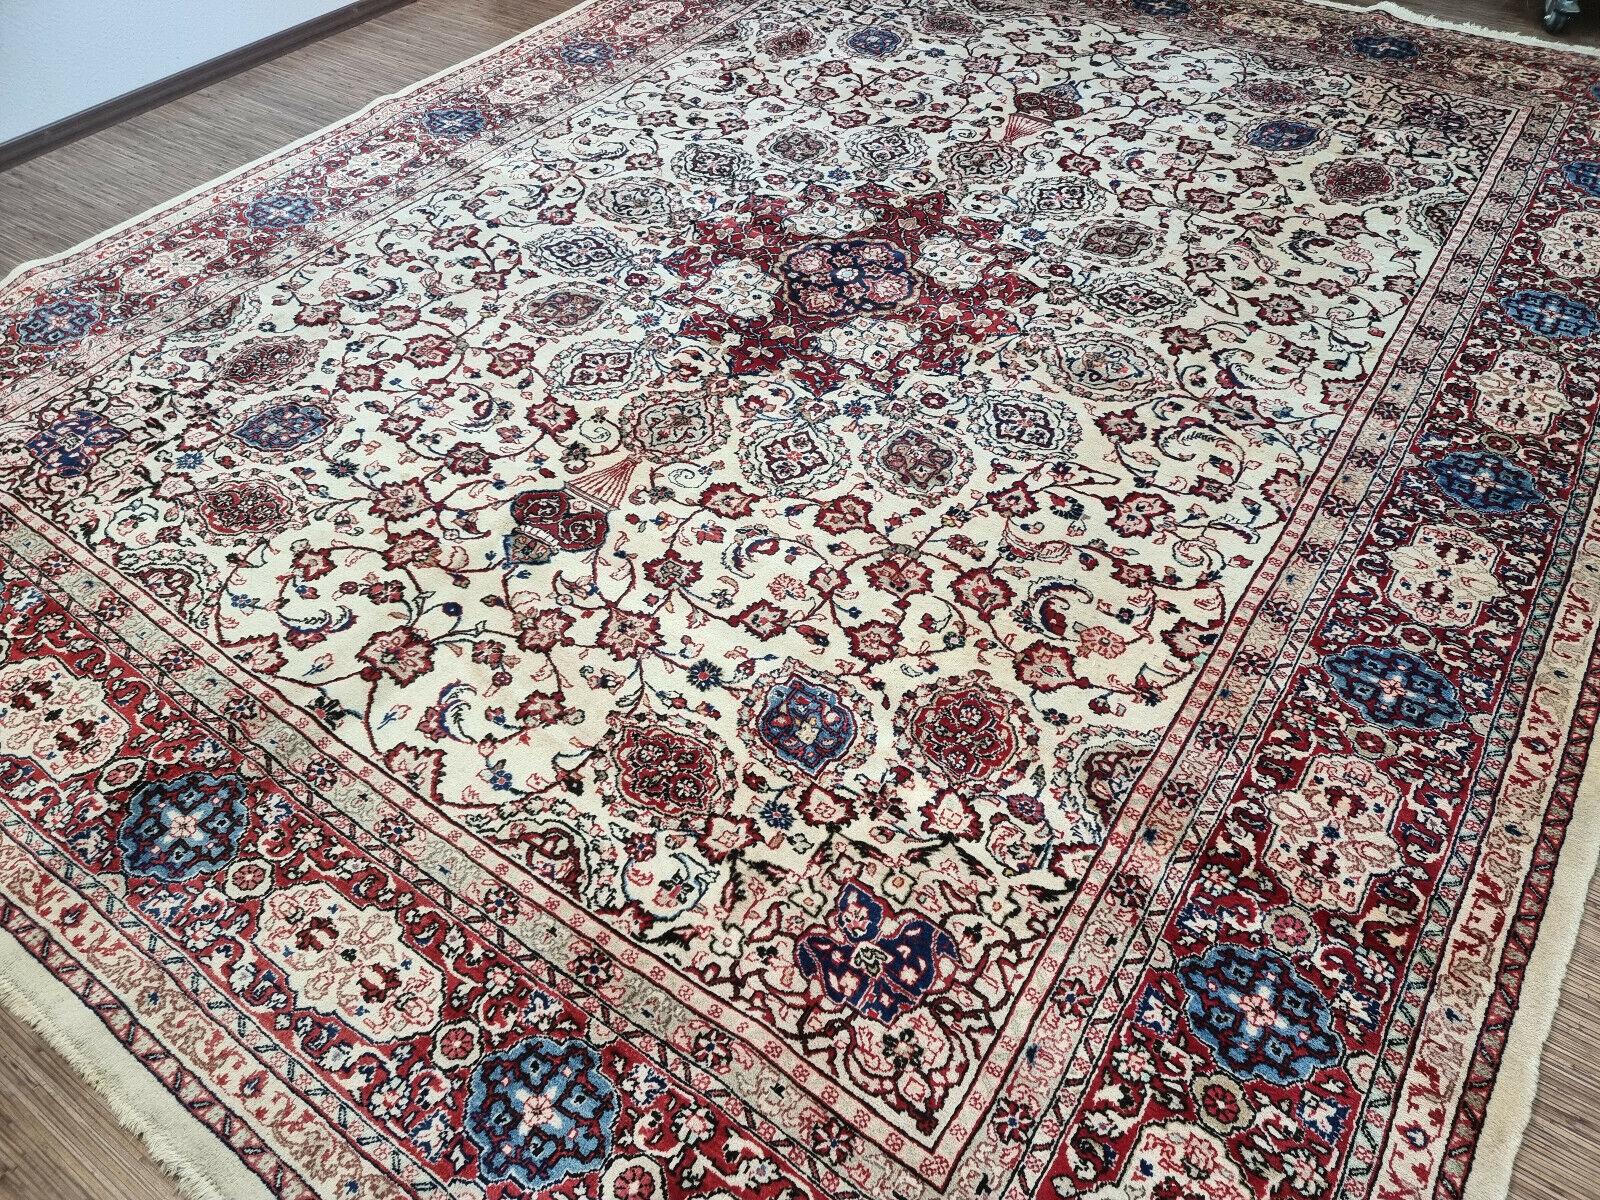 Handmade Vintage Persian Style Sarouk Oversize Rug 10.4' x 13.2', 1970s - 1D67 In Good Condition For Sale In Bordeaux, FR